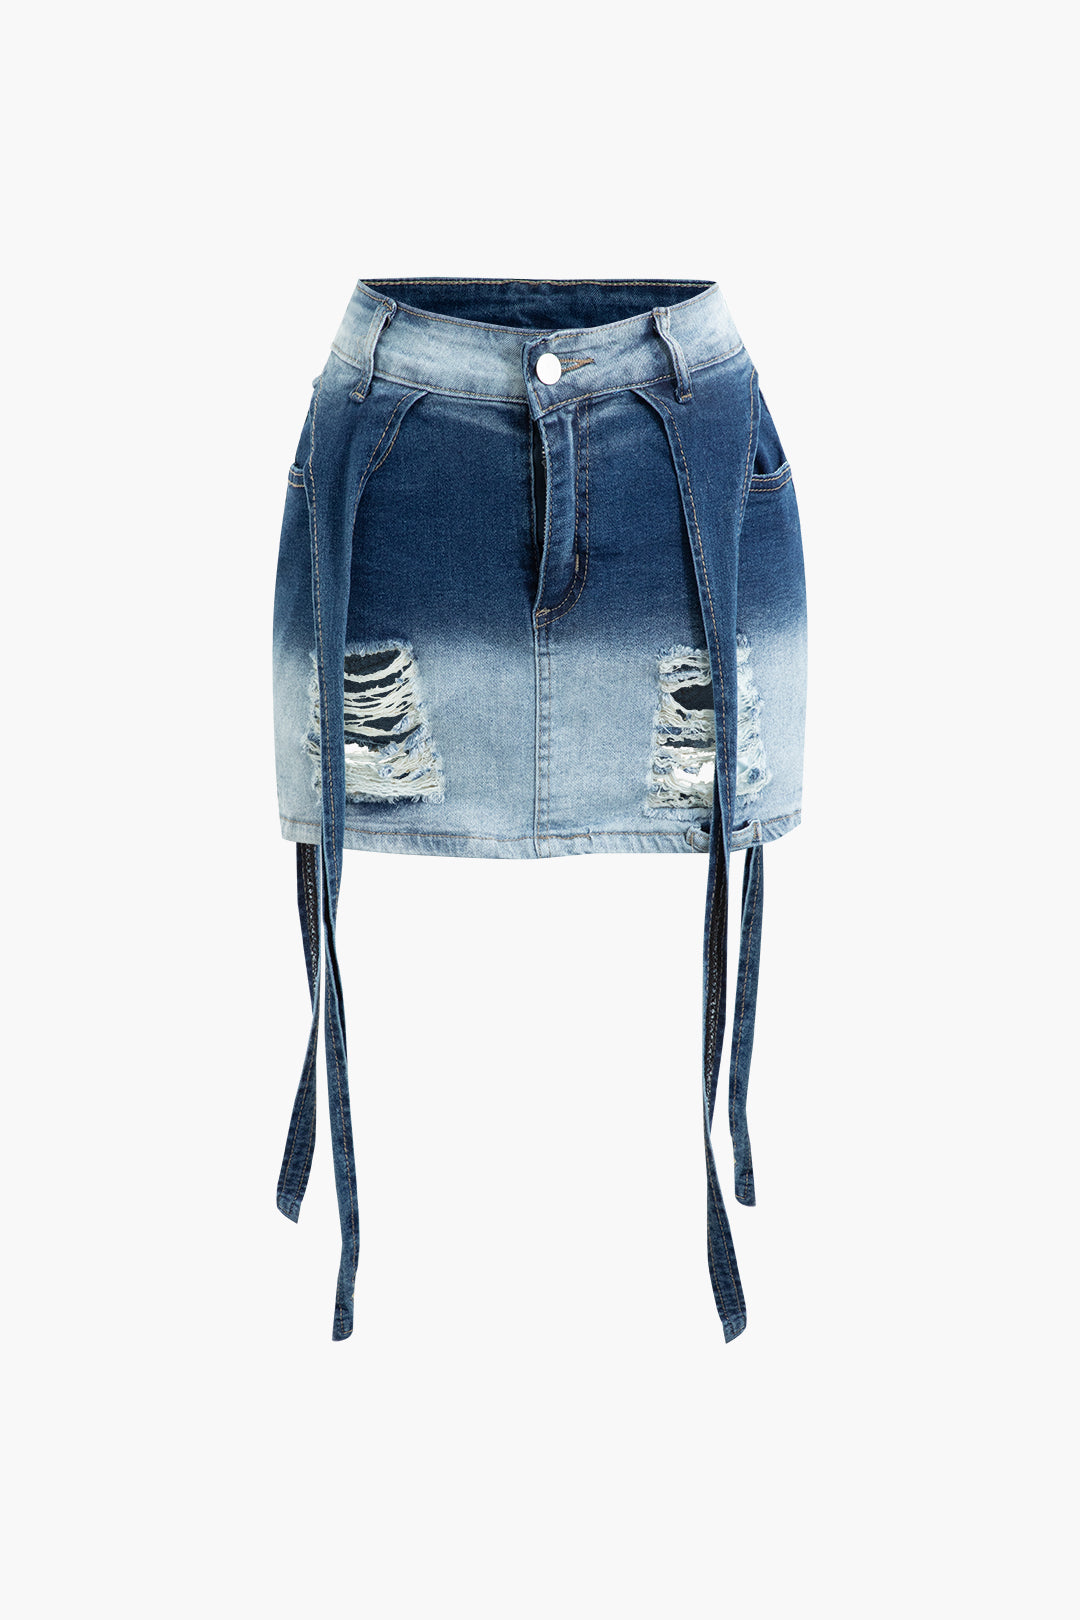 Distressed Ombre Denim Skirt with Ribbons